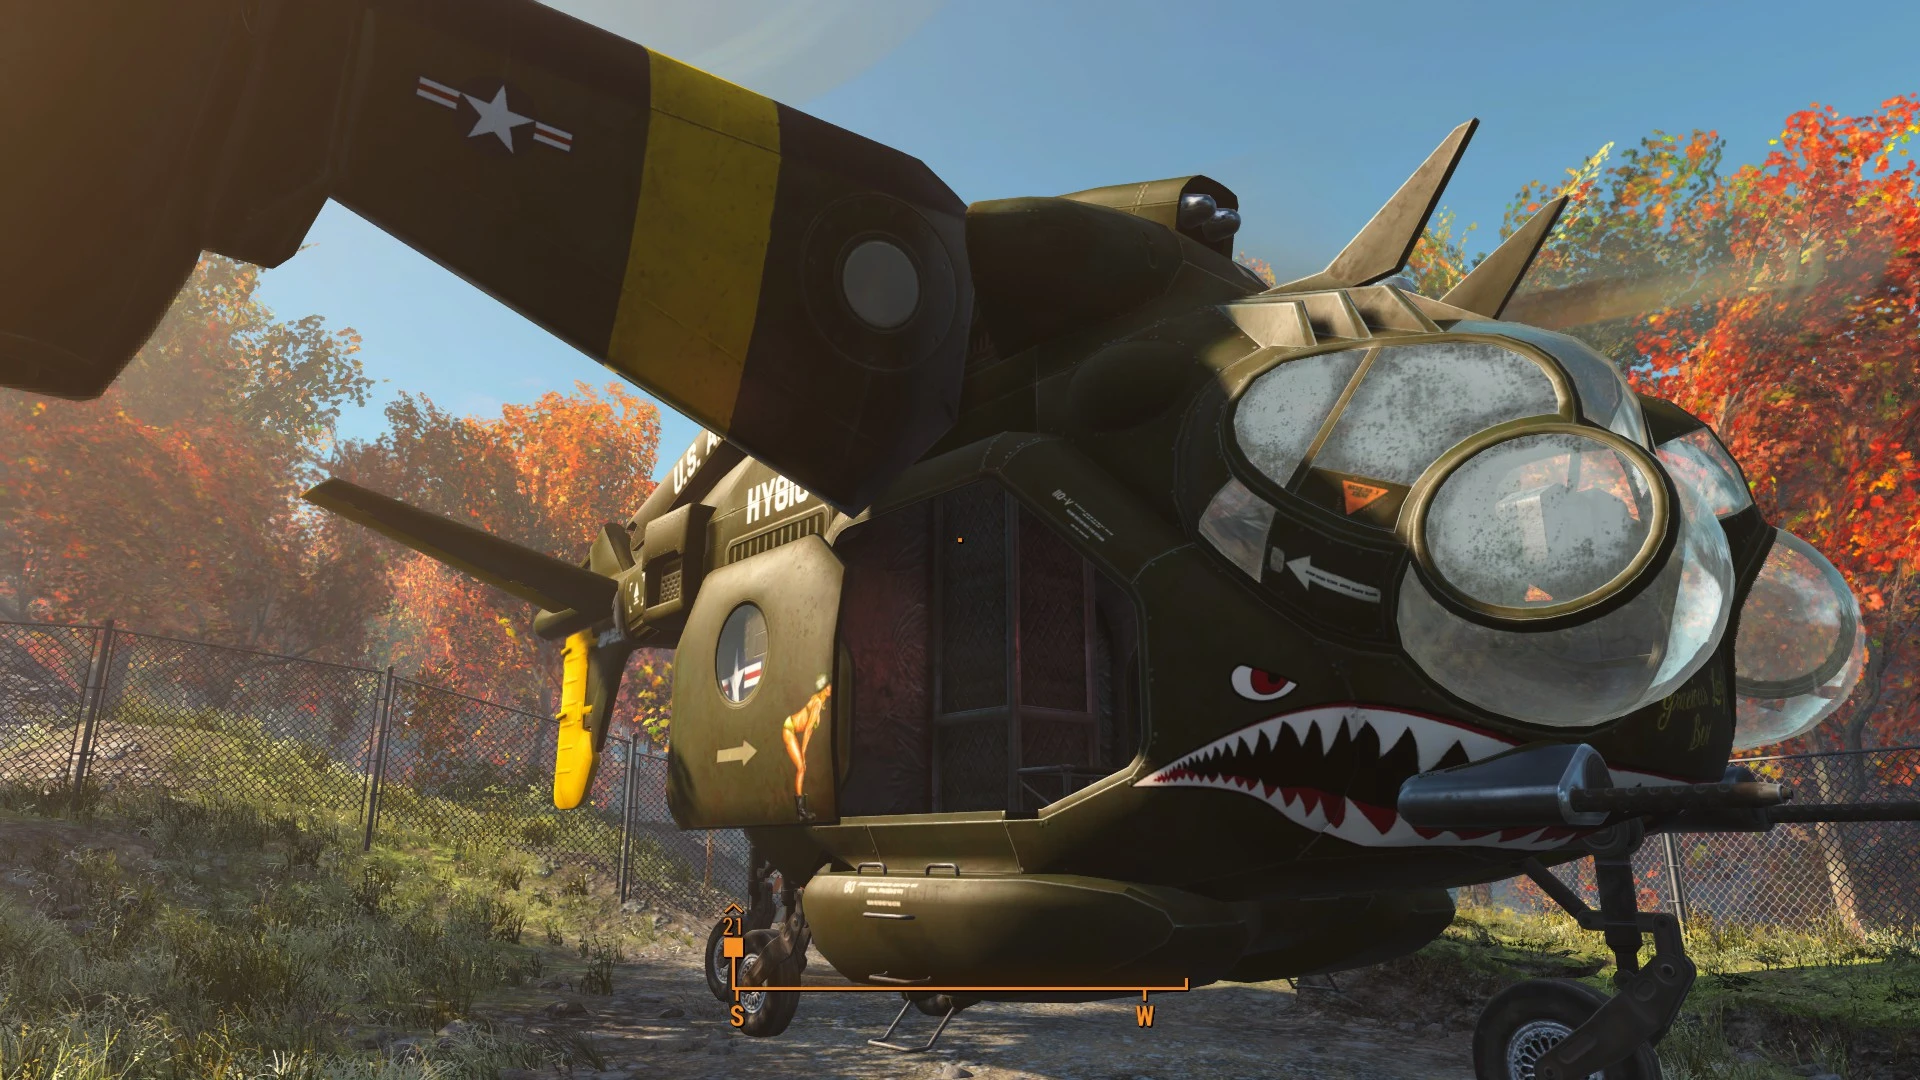 Vertibirds in fallout 4 фото 4